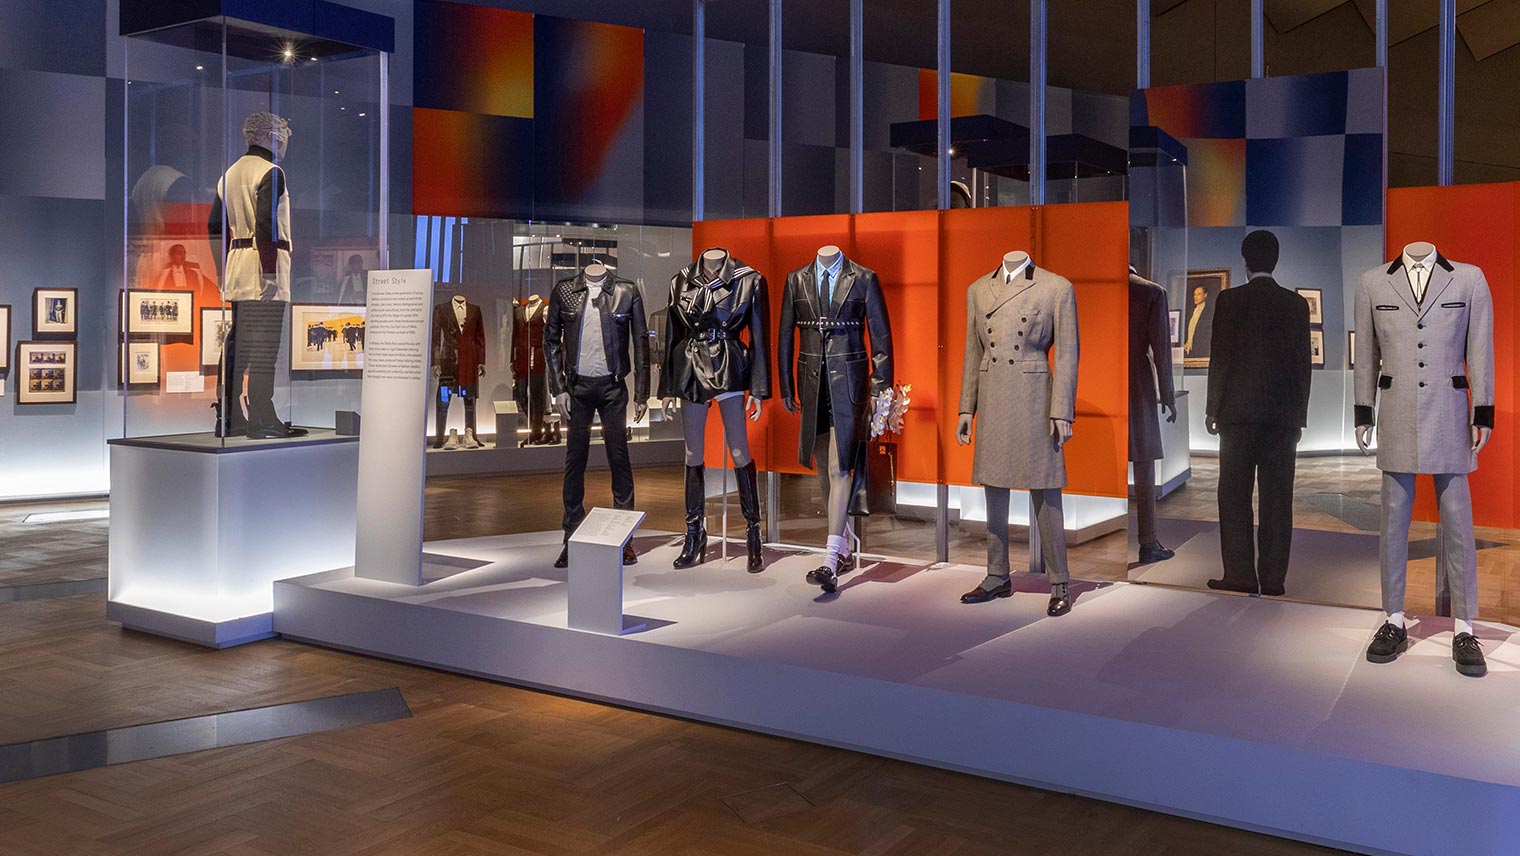 Installation view of Fashioning Masculinities at V&A